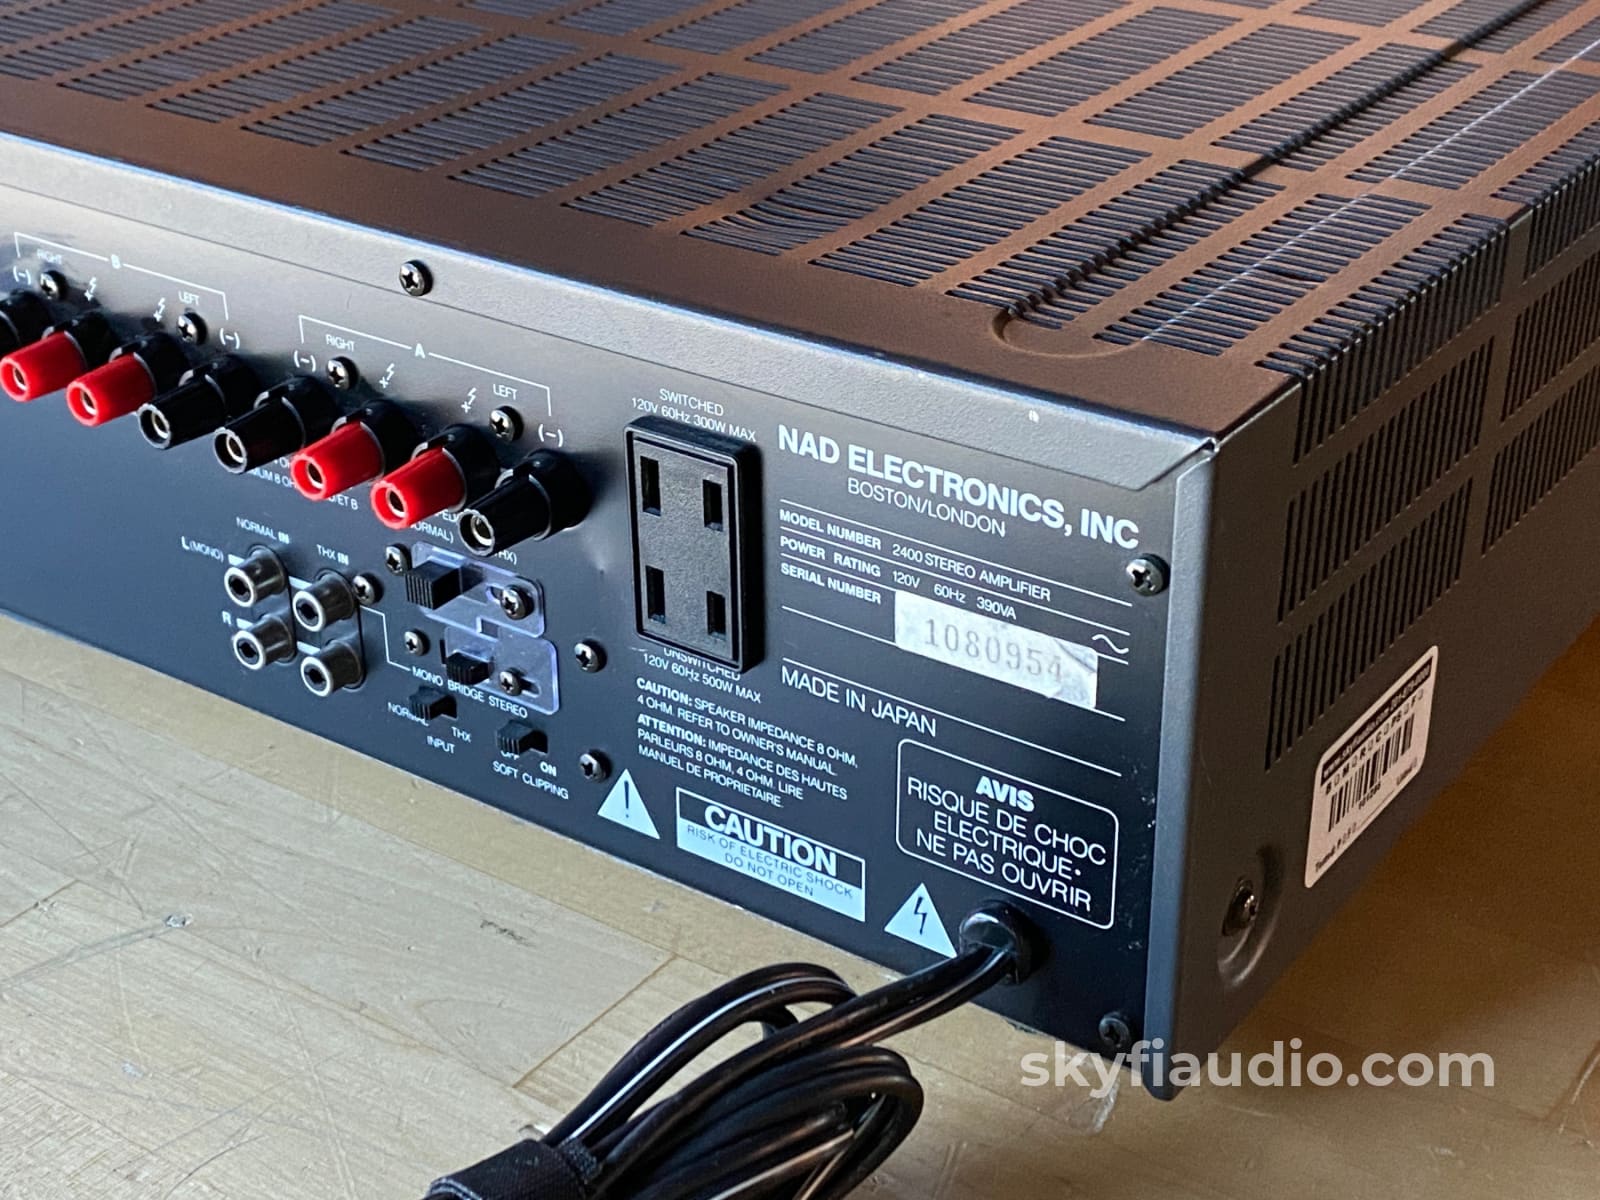 Nad 2400 Monitor Series Amplifier Thx Rated